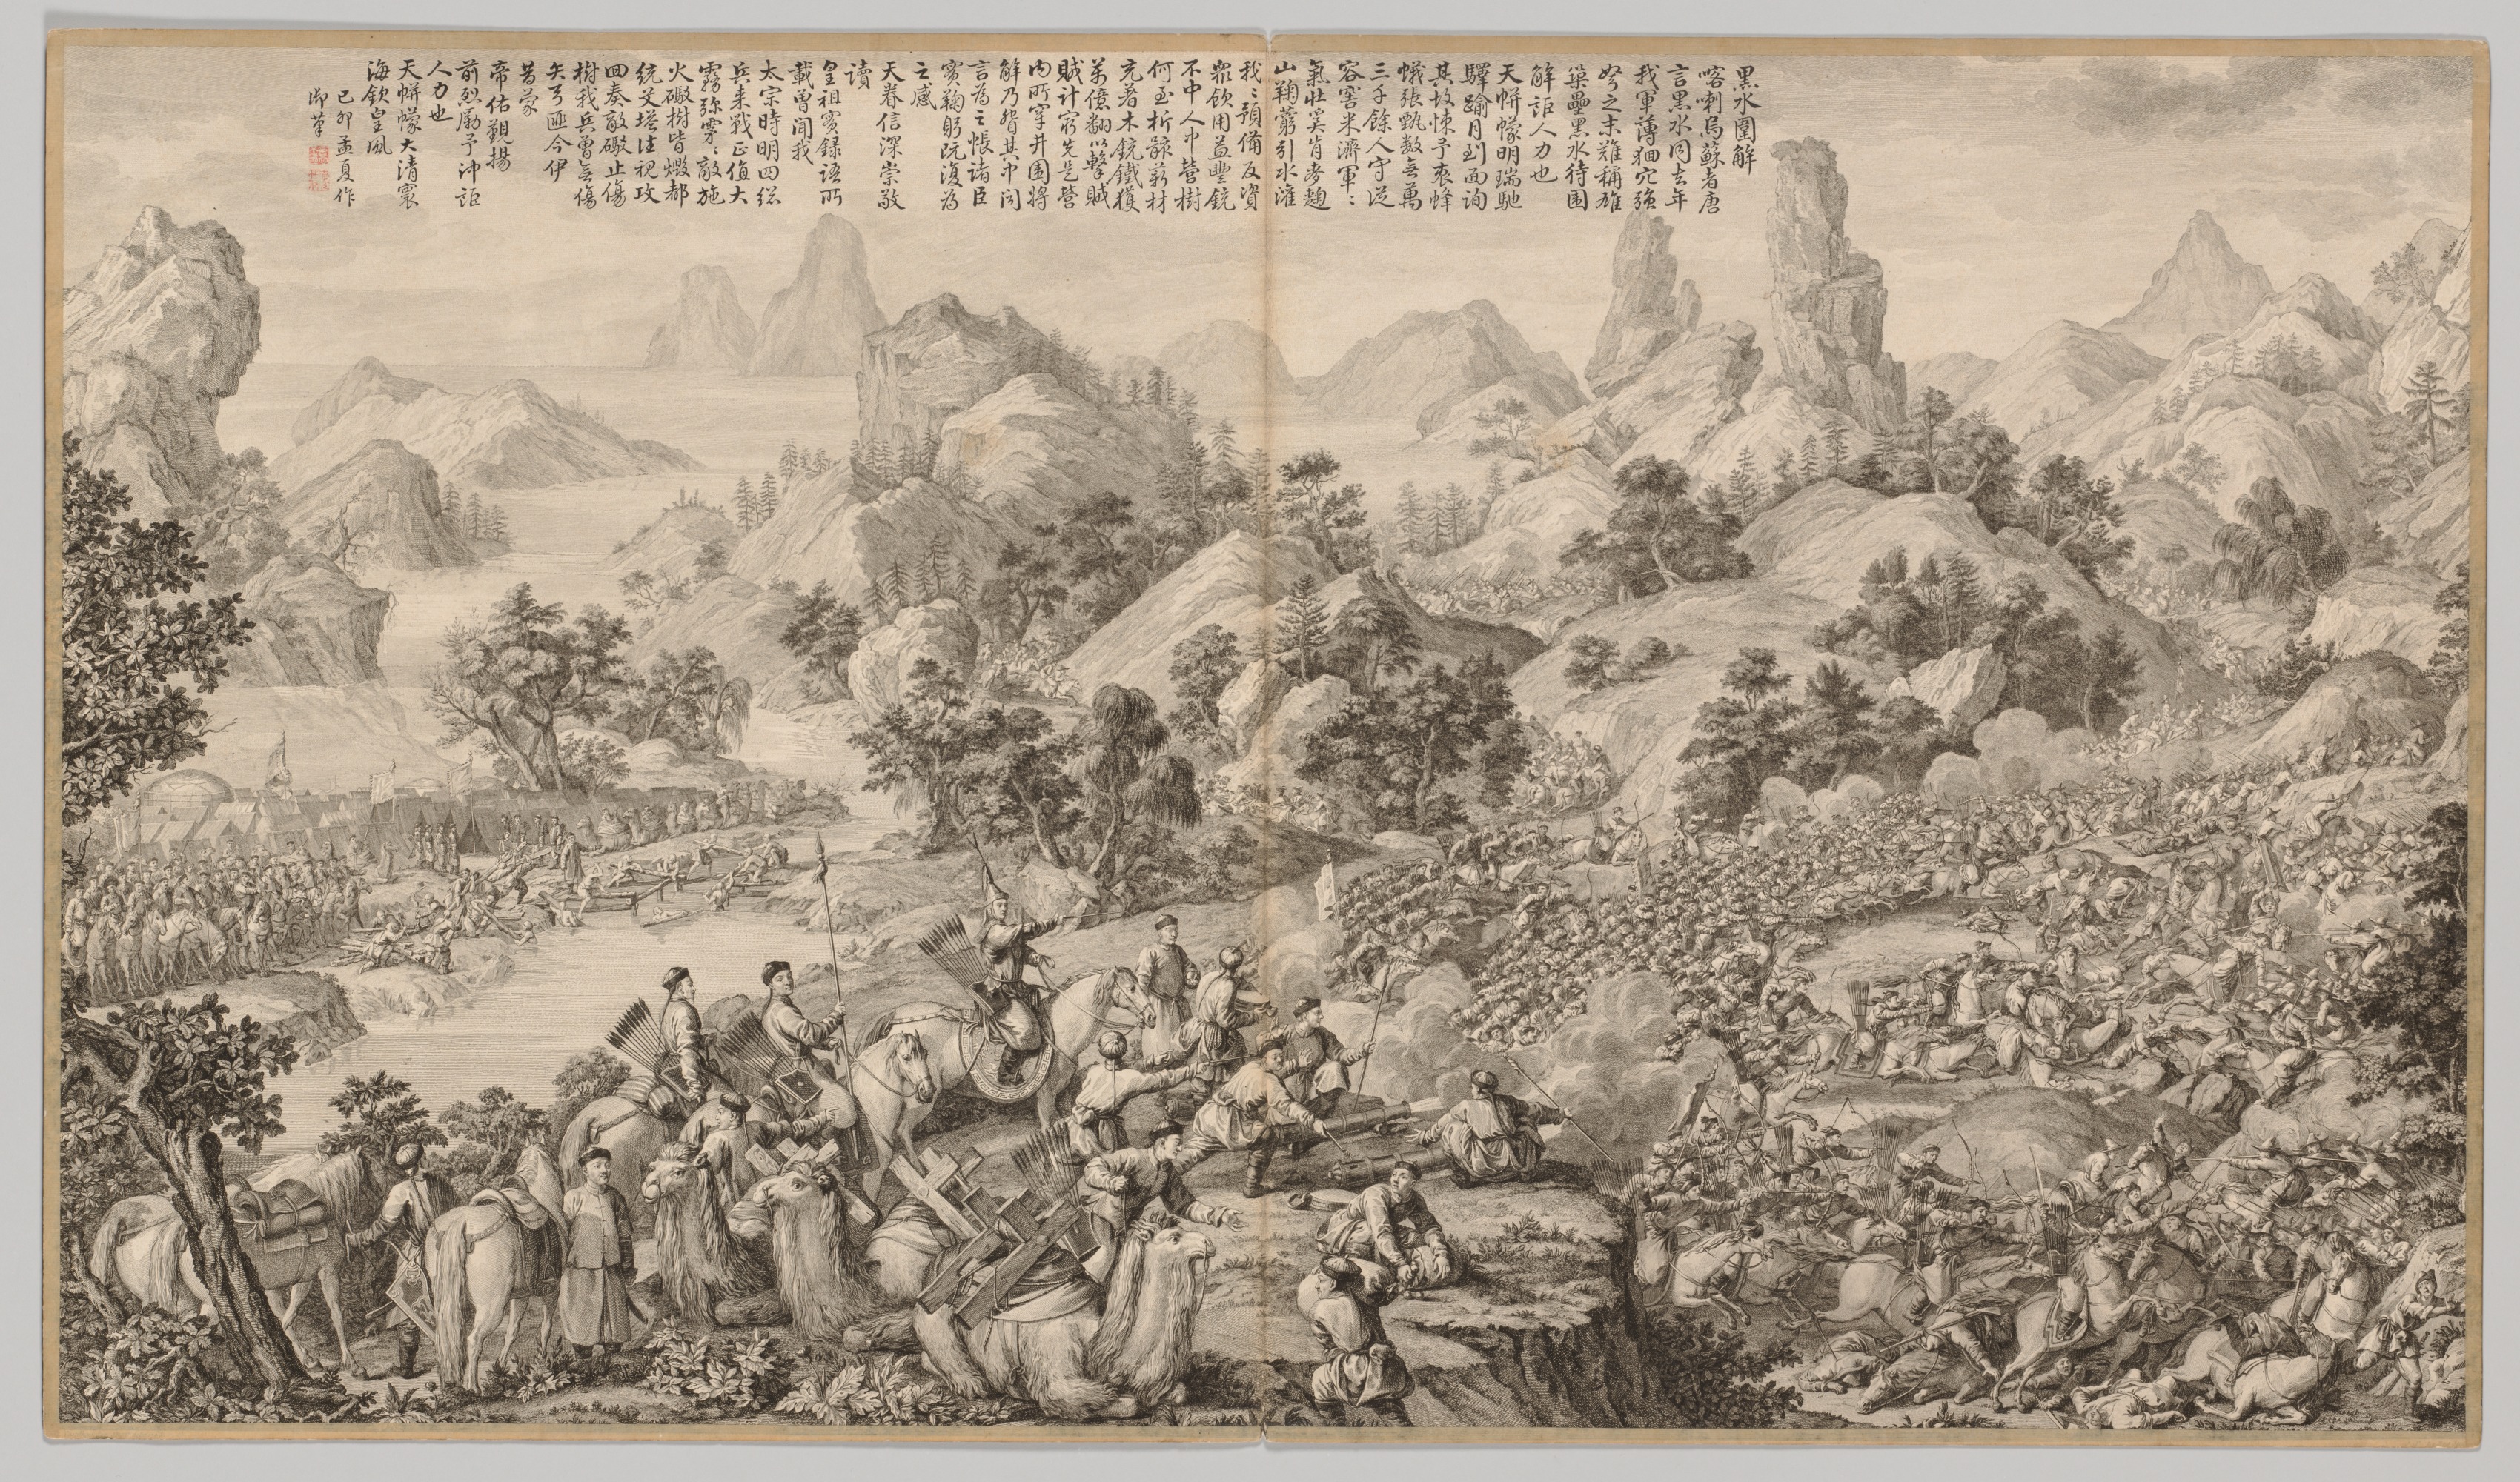 Breaking Through the Siege at Hesui: from Battle Scenes of the Quelling of Rebellions in the Western Regions, with imperial Poems